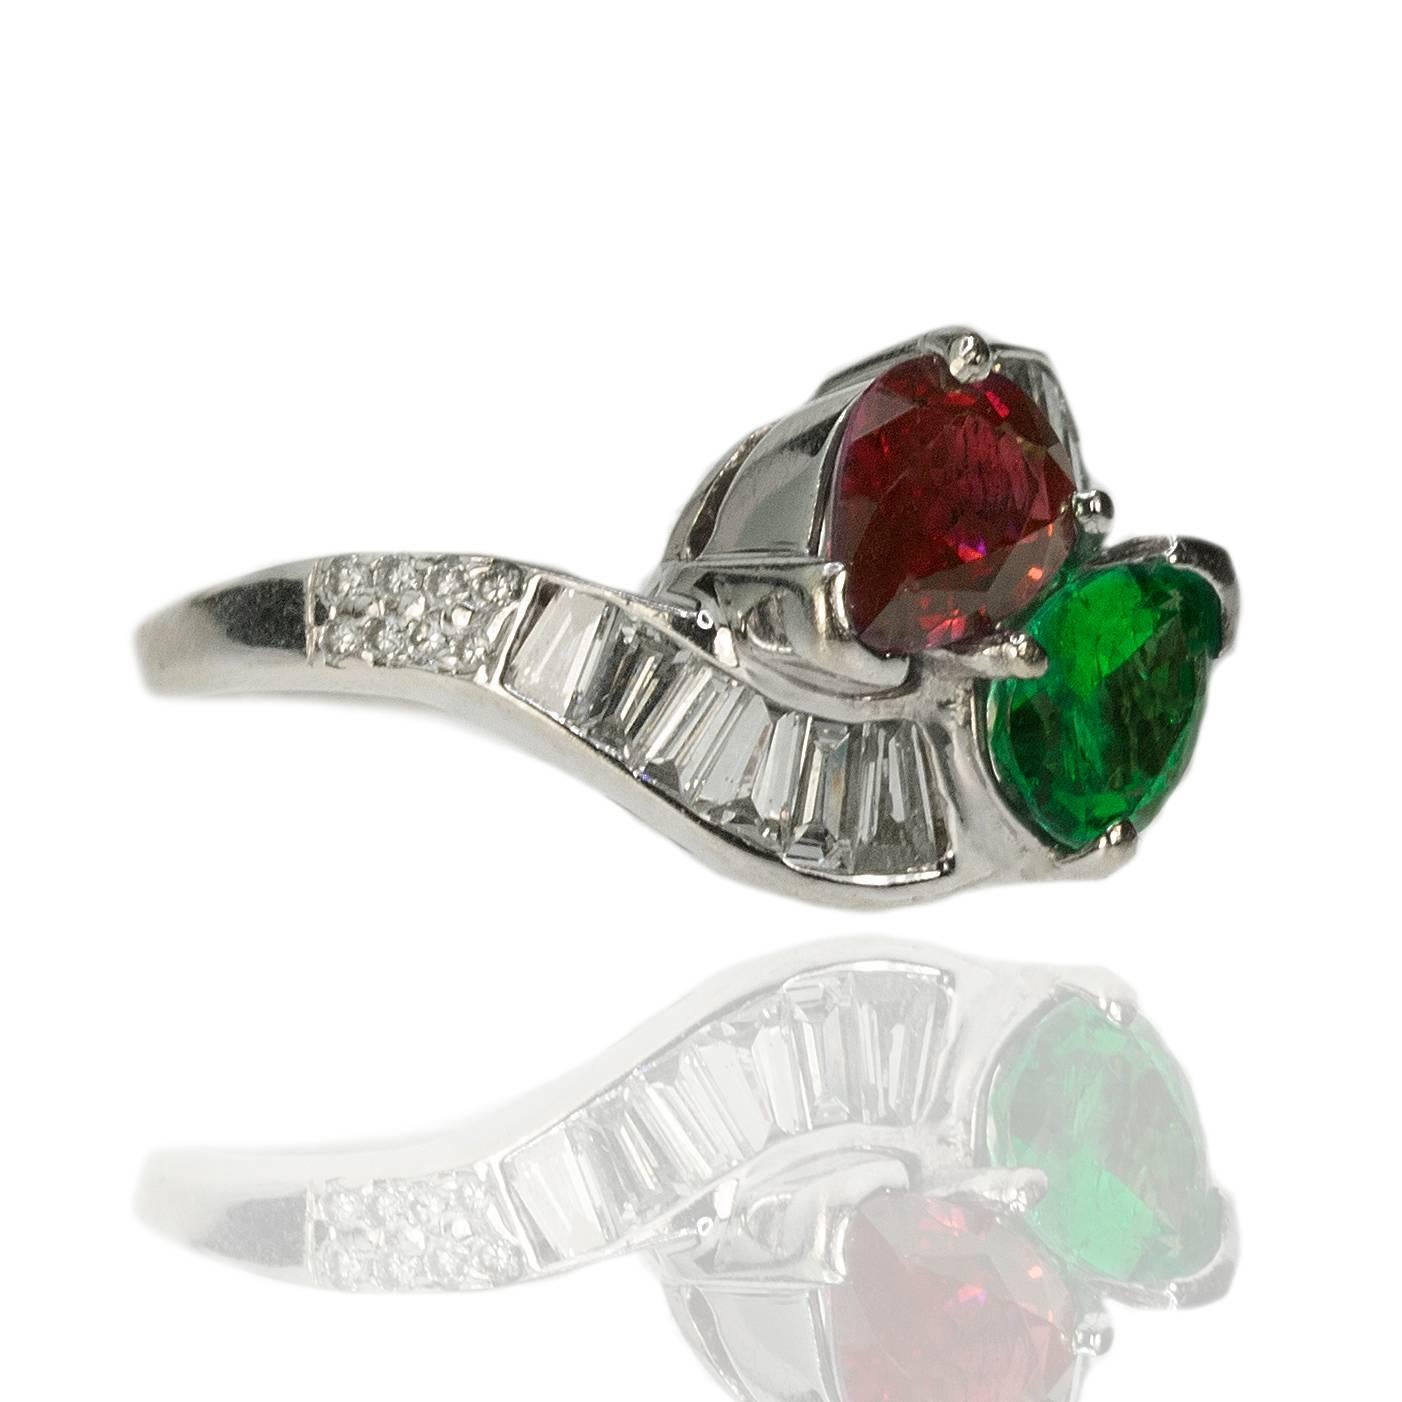 14k Bypass Ring, Burma Ruby weighing 1.32 carats, Colombian Emerald weighing 0.92 carats and 16 round brilliants weighing approximately 0.24 carats and 12 tapered baguettes weighing apprximately 0.60 carats, 6.05g